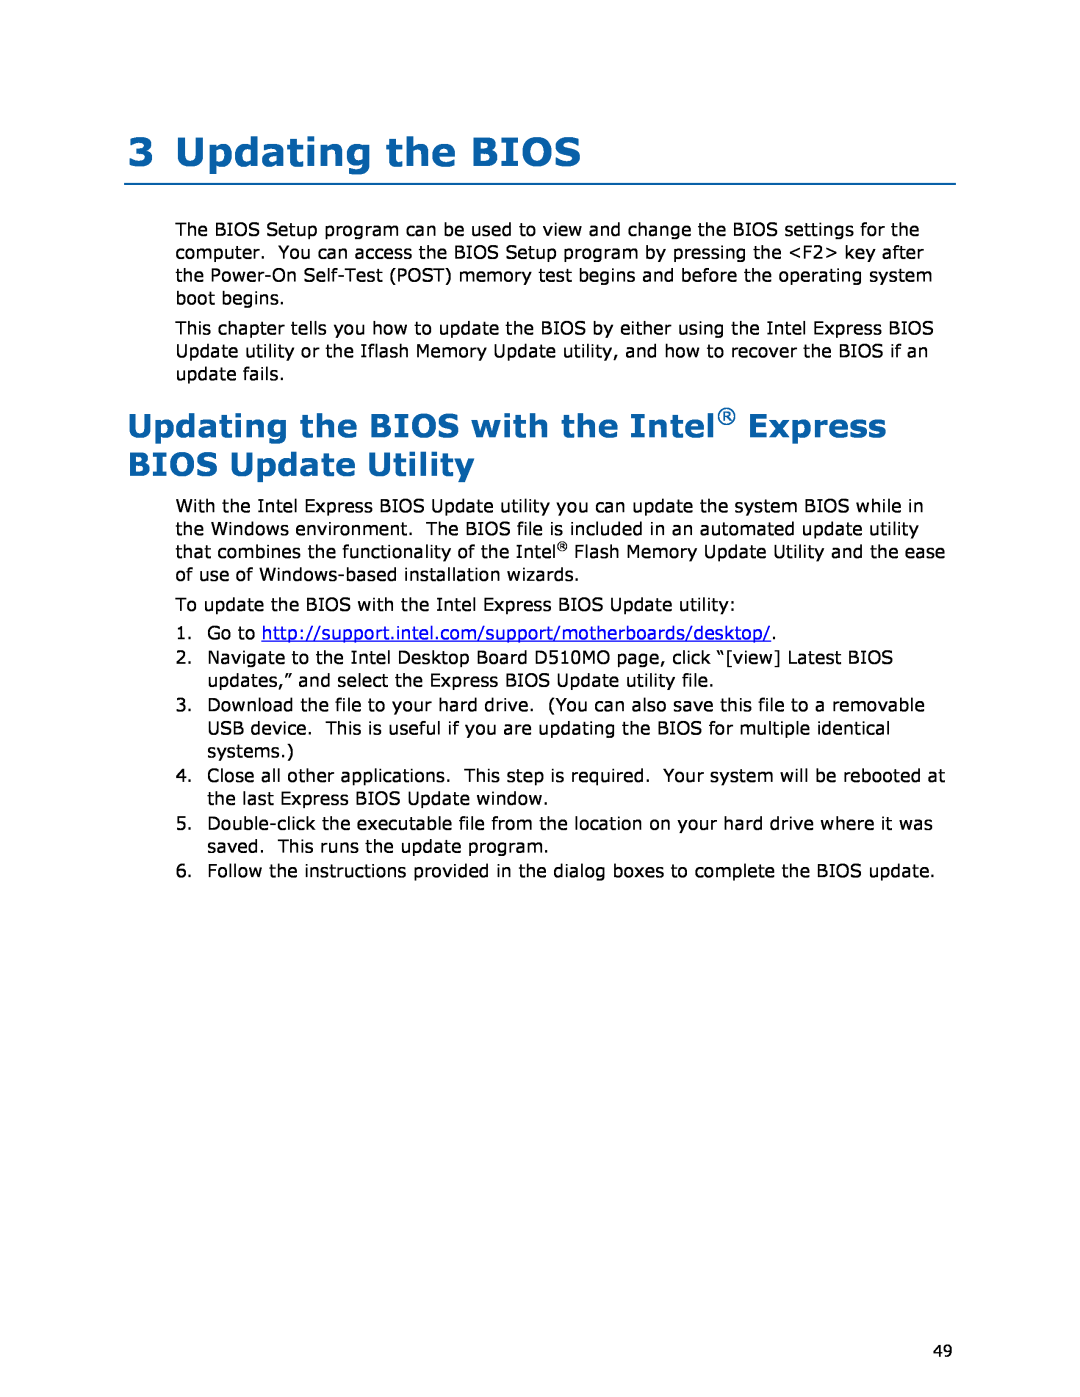 Intel D510MO manual Updating the BIOS with the Intel Express BIOS Update Utility 